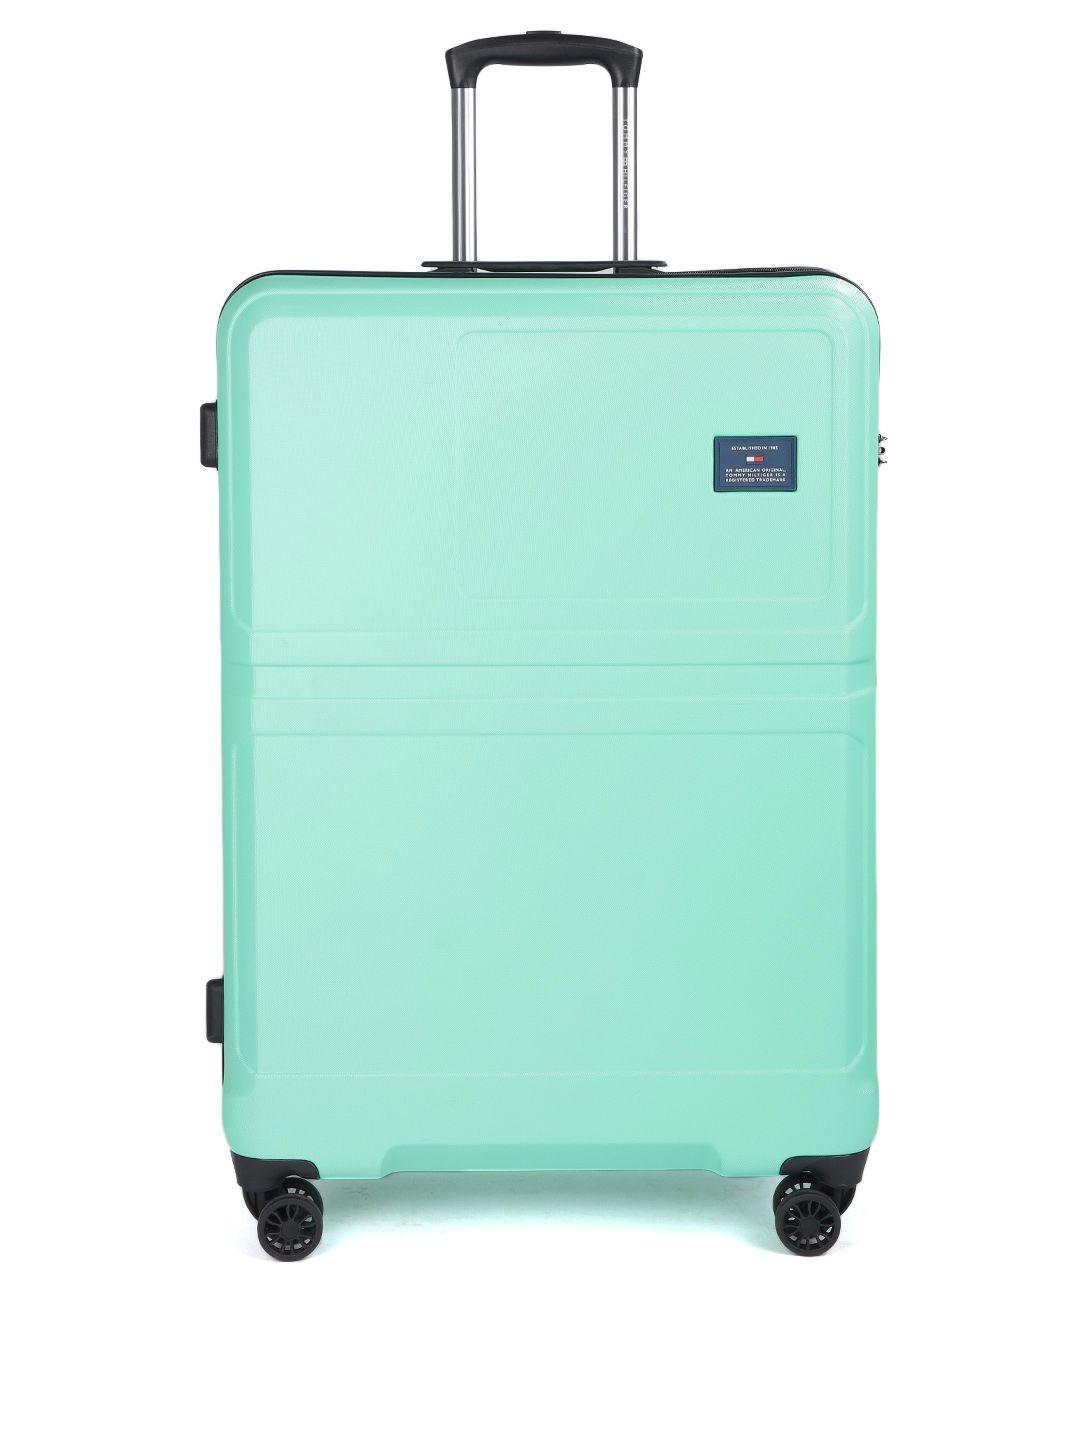 tommy hilfiger   mint green hard luggage 4-wheel large trolley suitcase